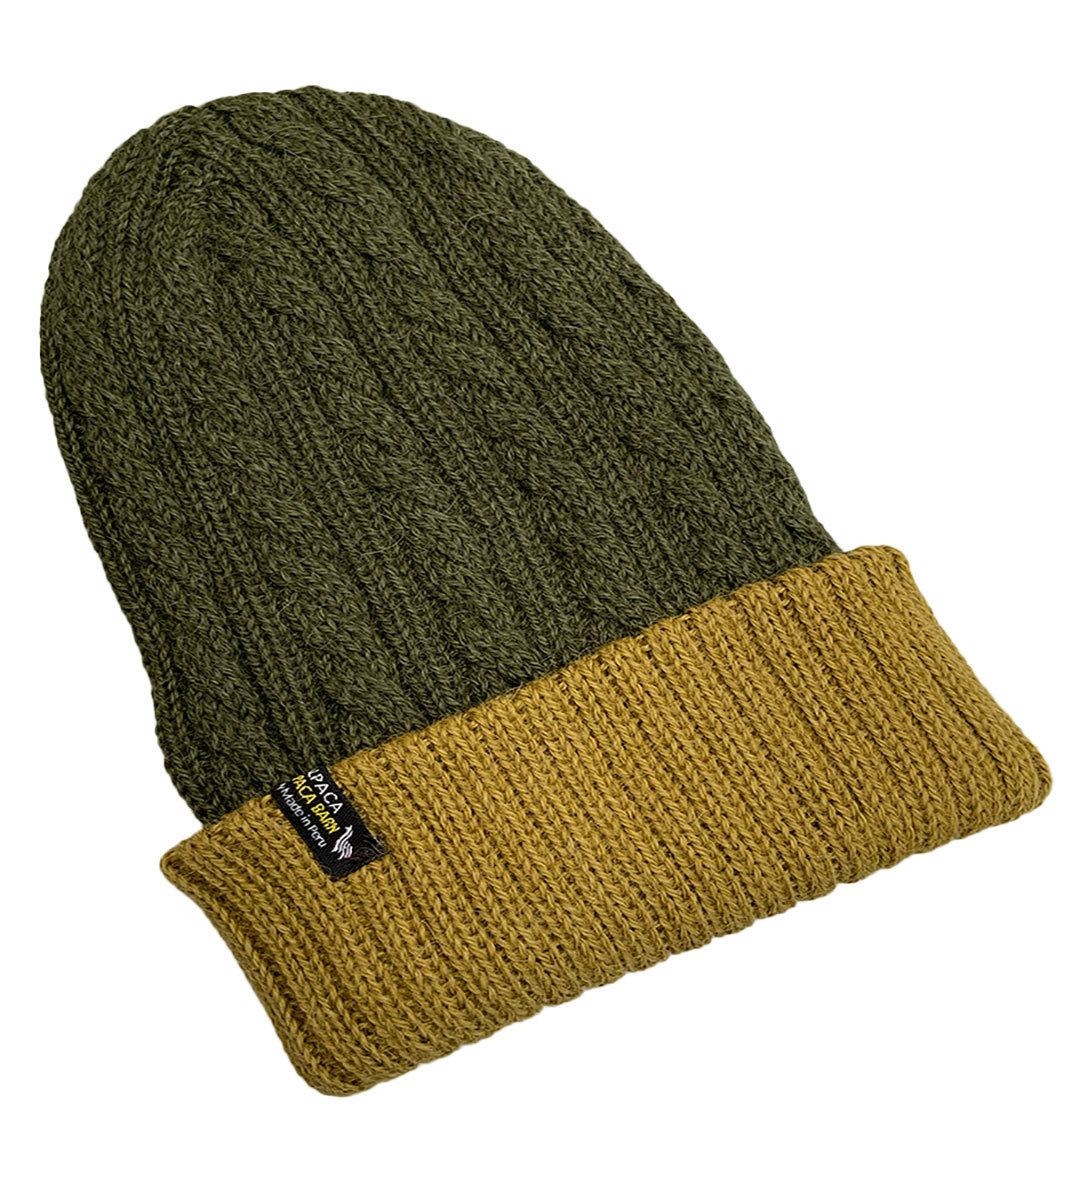 Reversible Hand Knit Alpaca Beanie - Military Green/Withered Green - 1